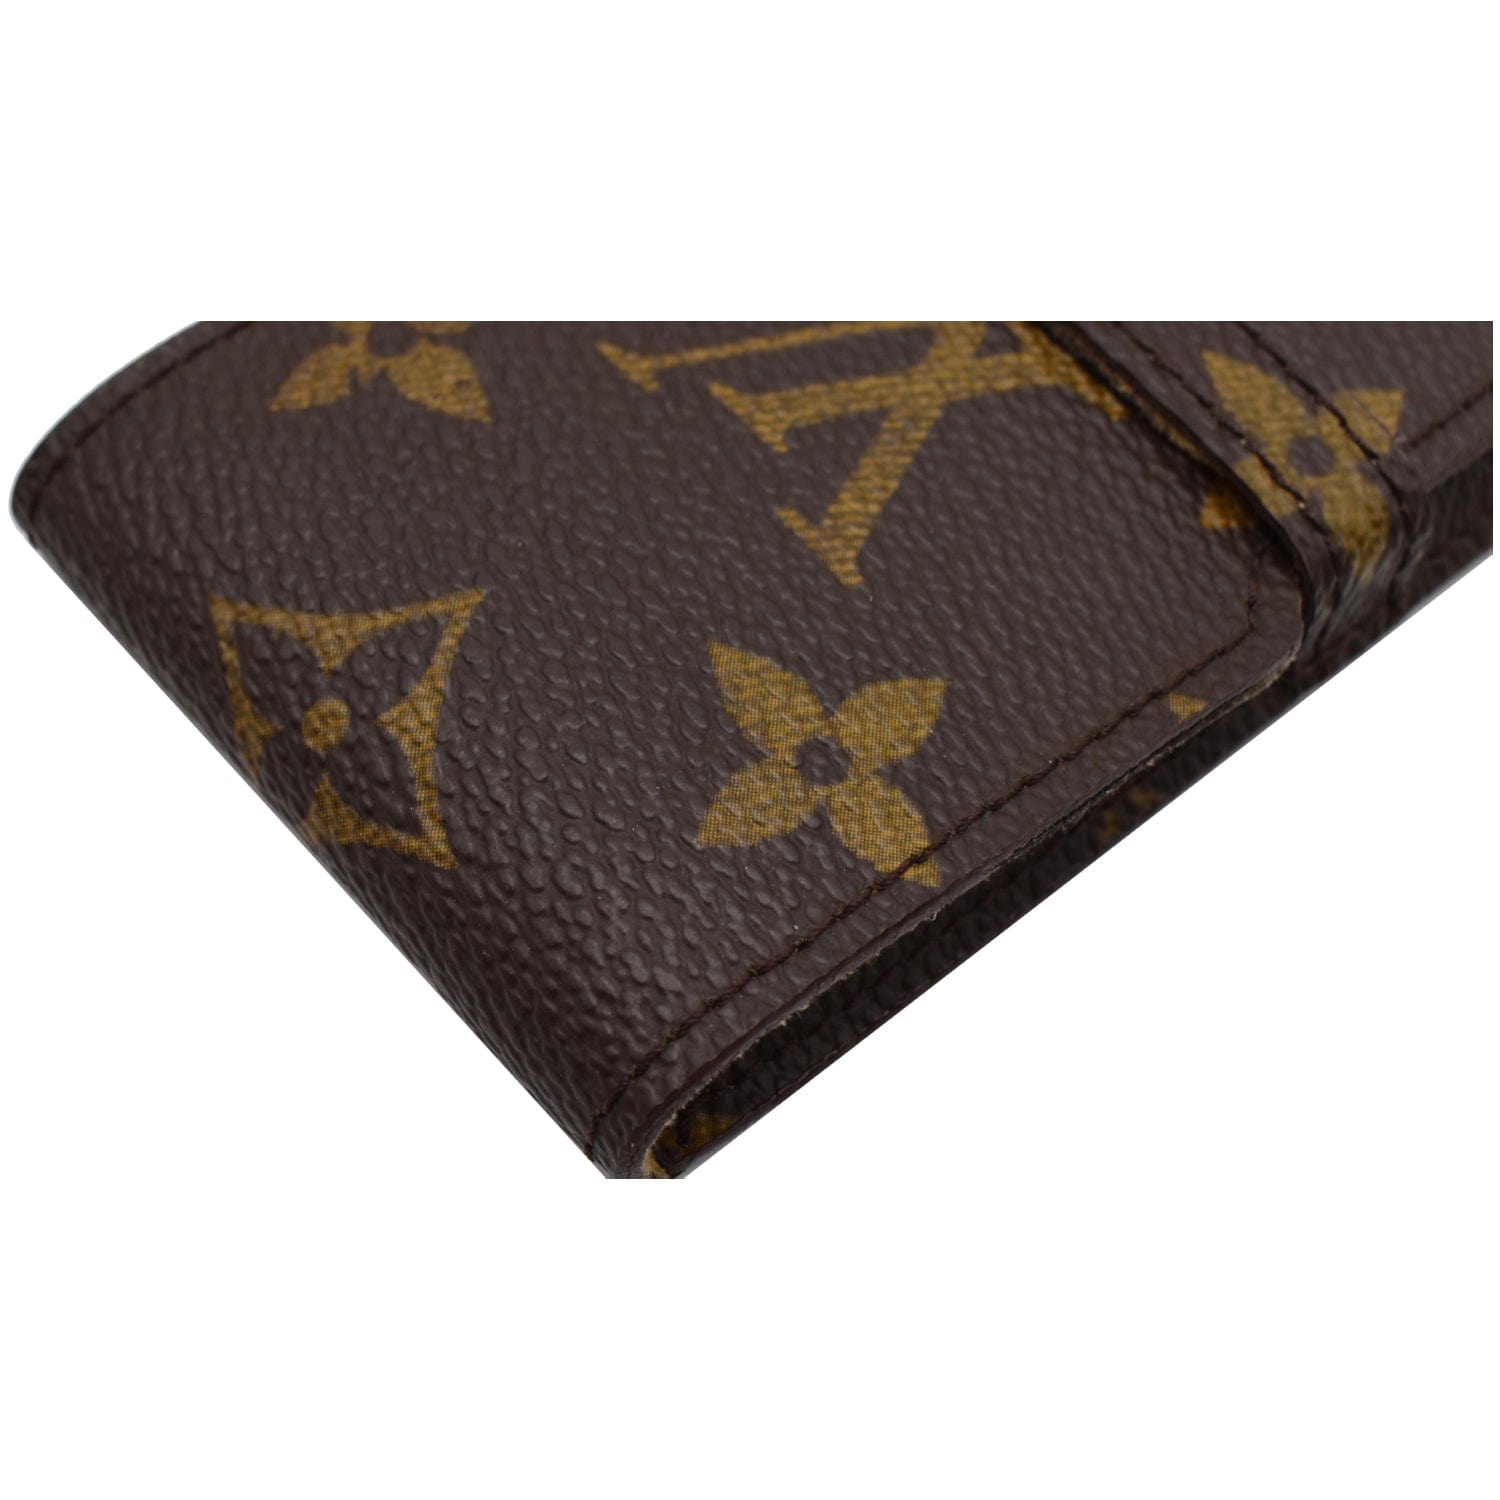 Authenticated Used LOUIS VUITTON Louis Vuitton Glasses Case M62970 Etuy  Lunet Lava Monogram LV Brown Accessory Pen Writing Instruments Multi Made  in France Womens Mens IT7BLYDQCA8S RLV2075M  Walmartcom